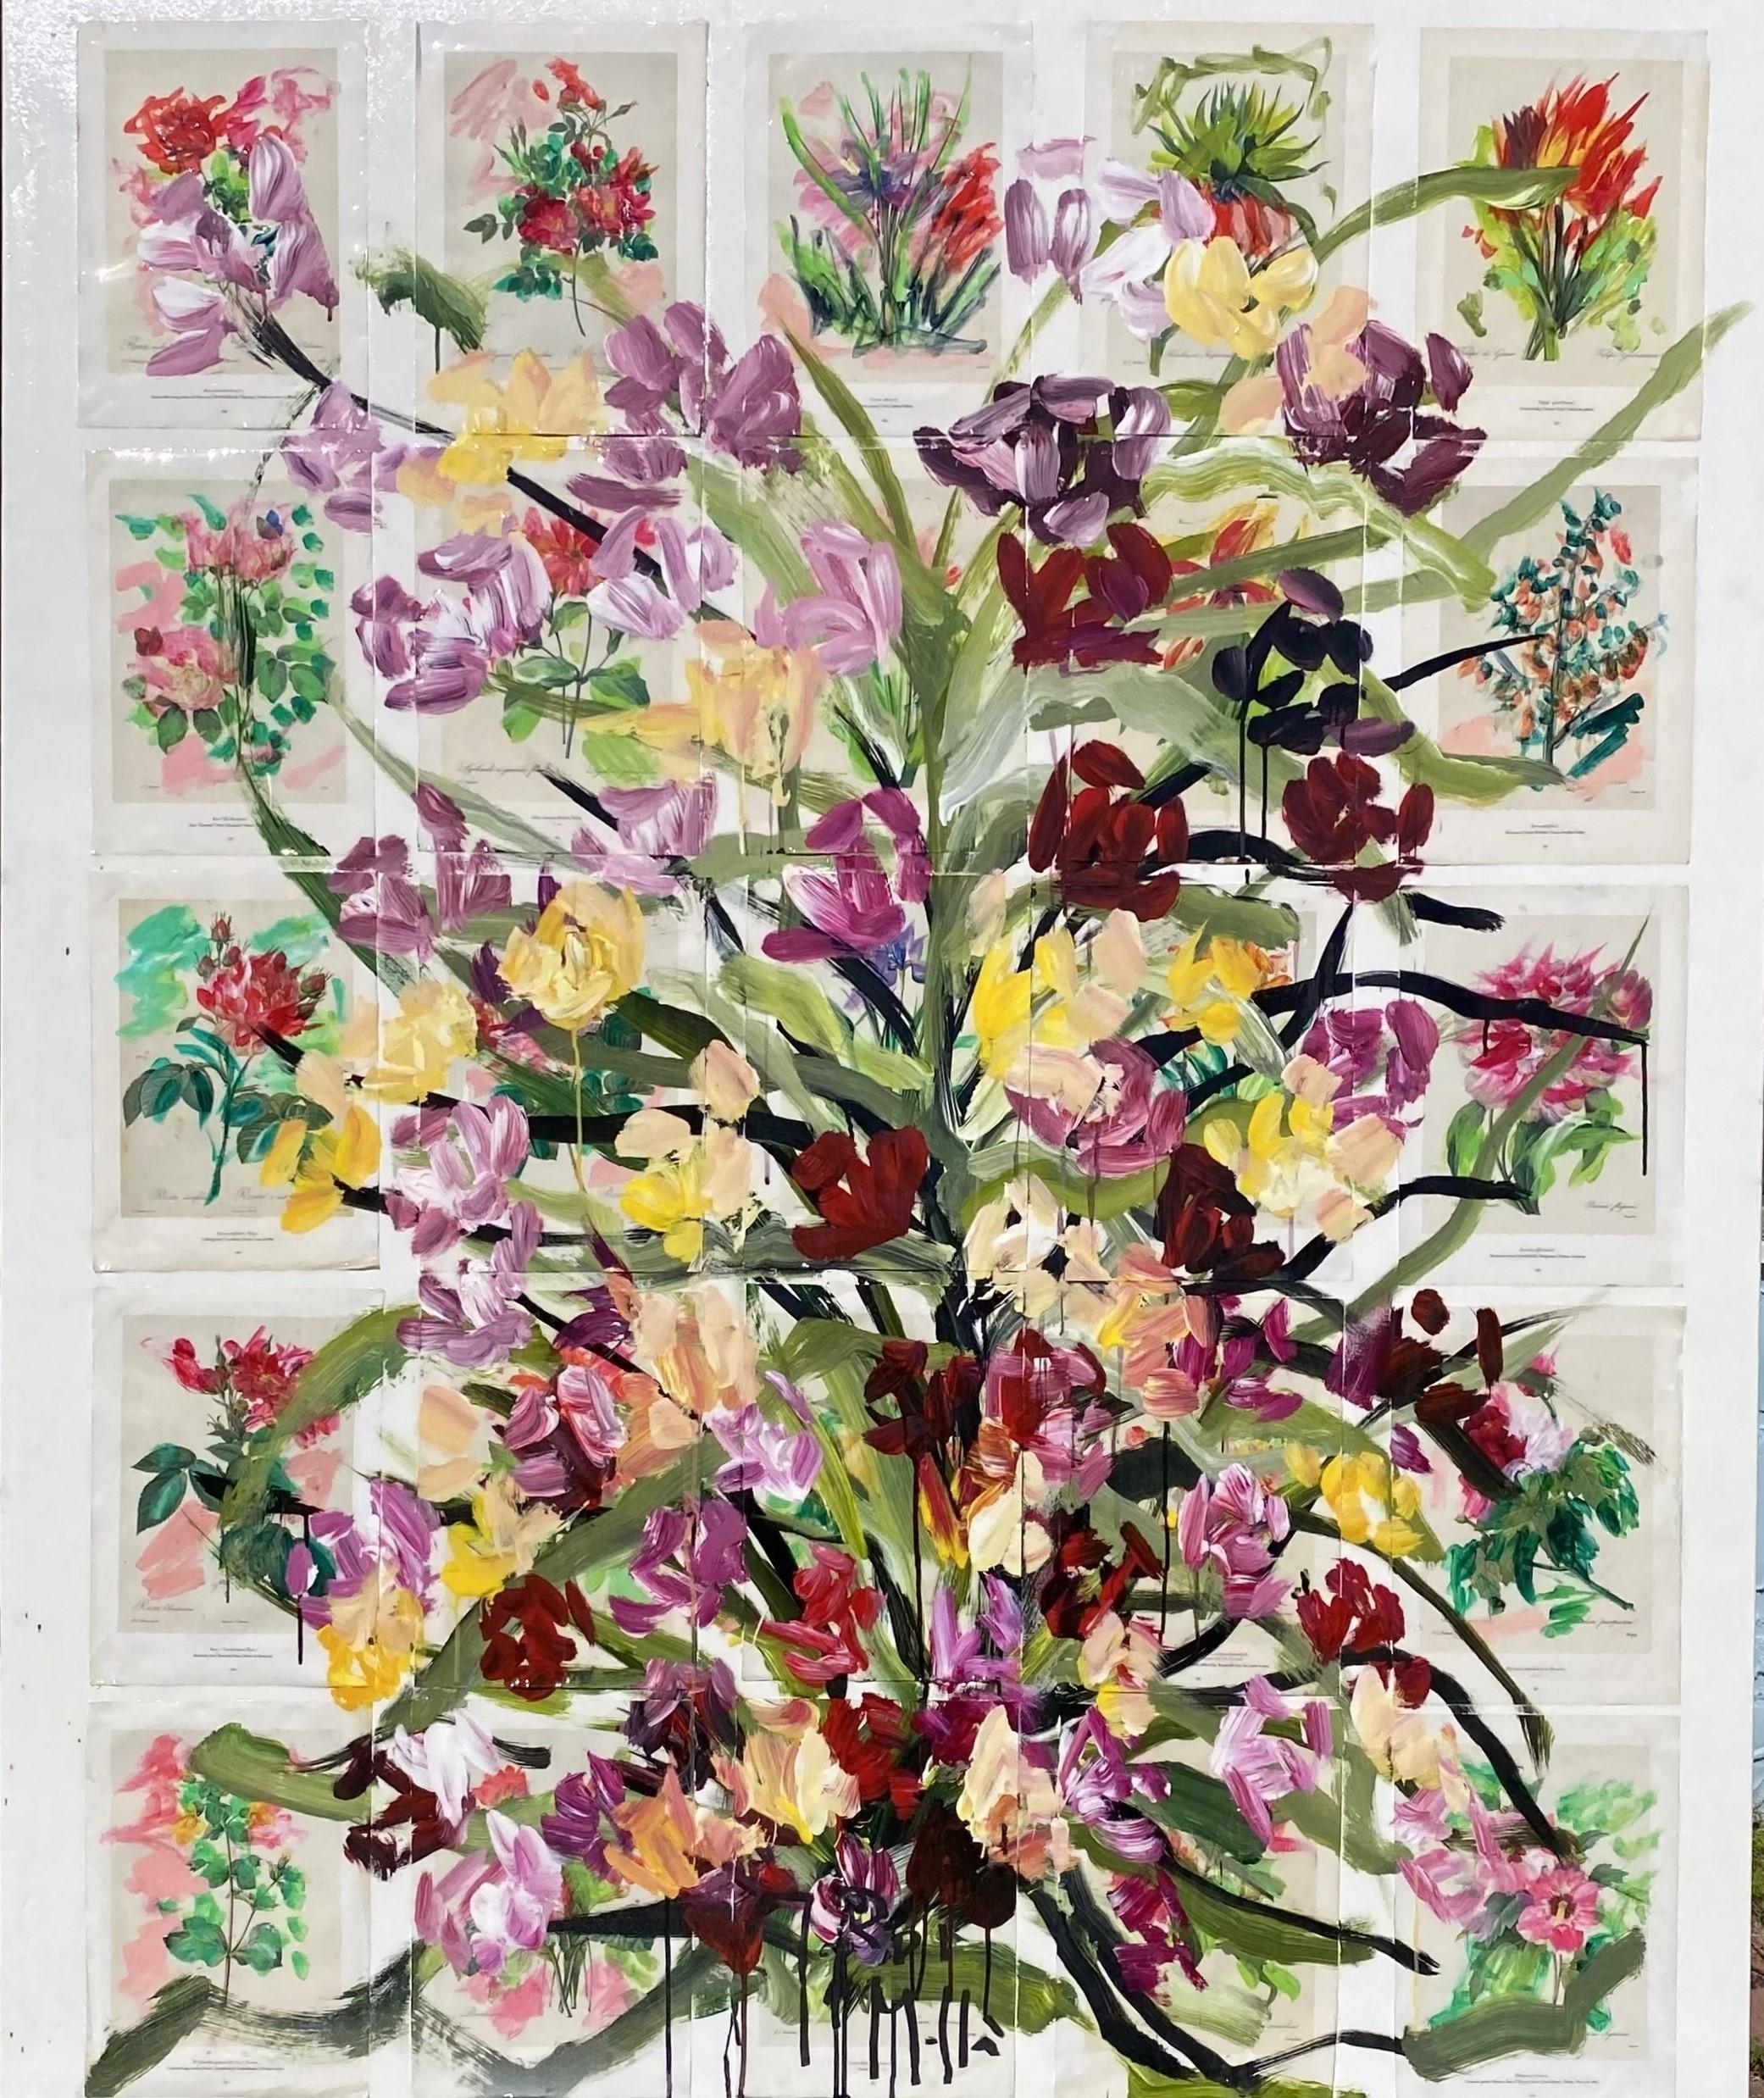 Book of Flowers 1 (large)  - Mixed Media Art by Jordi Mollà